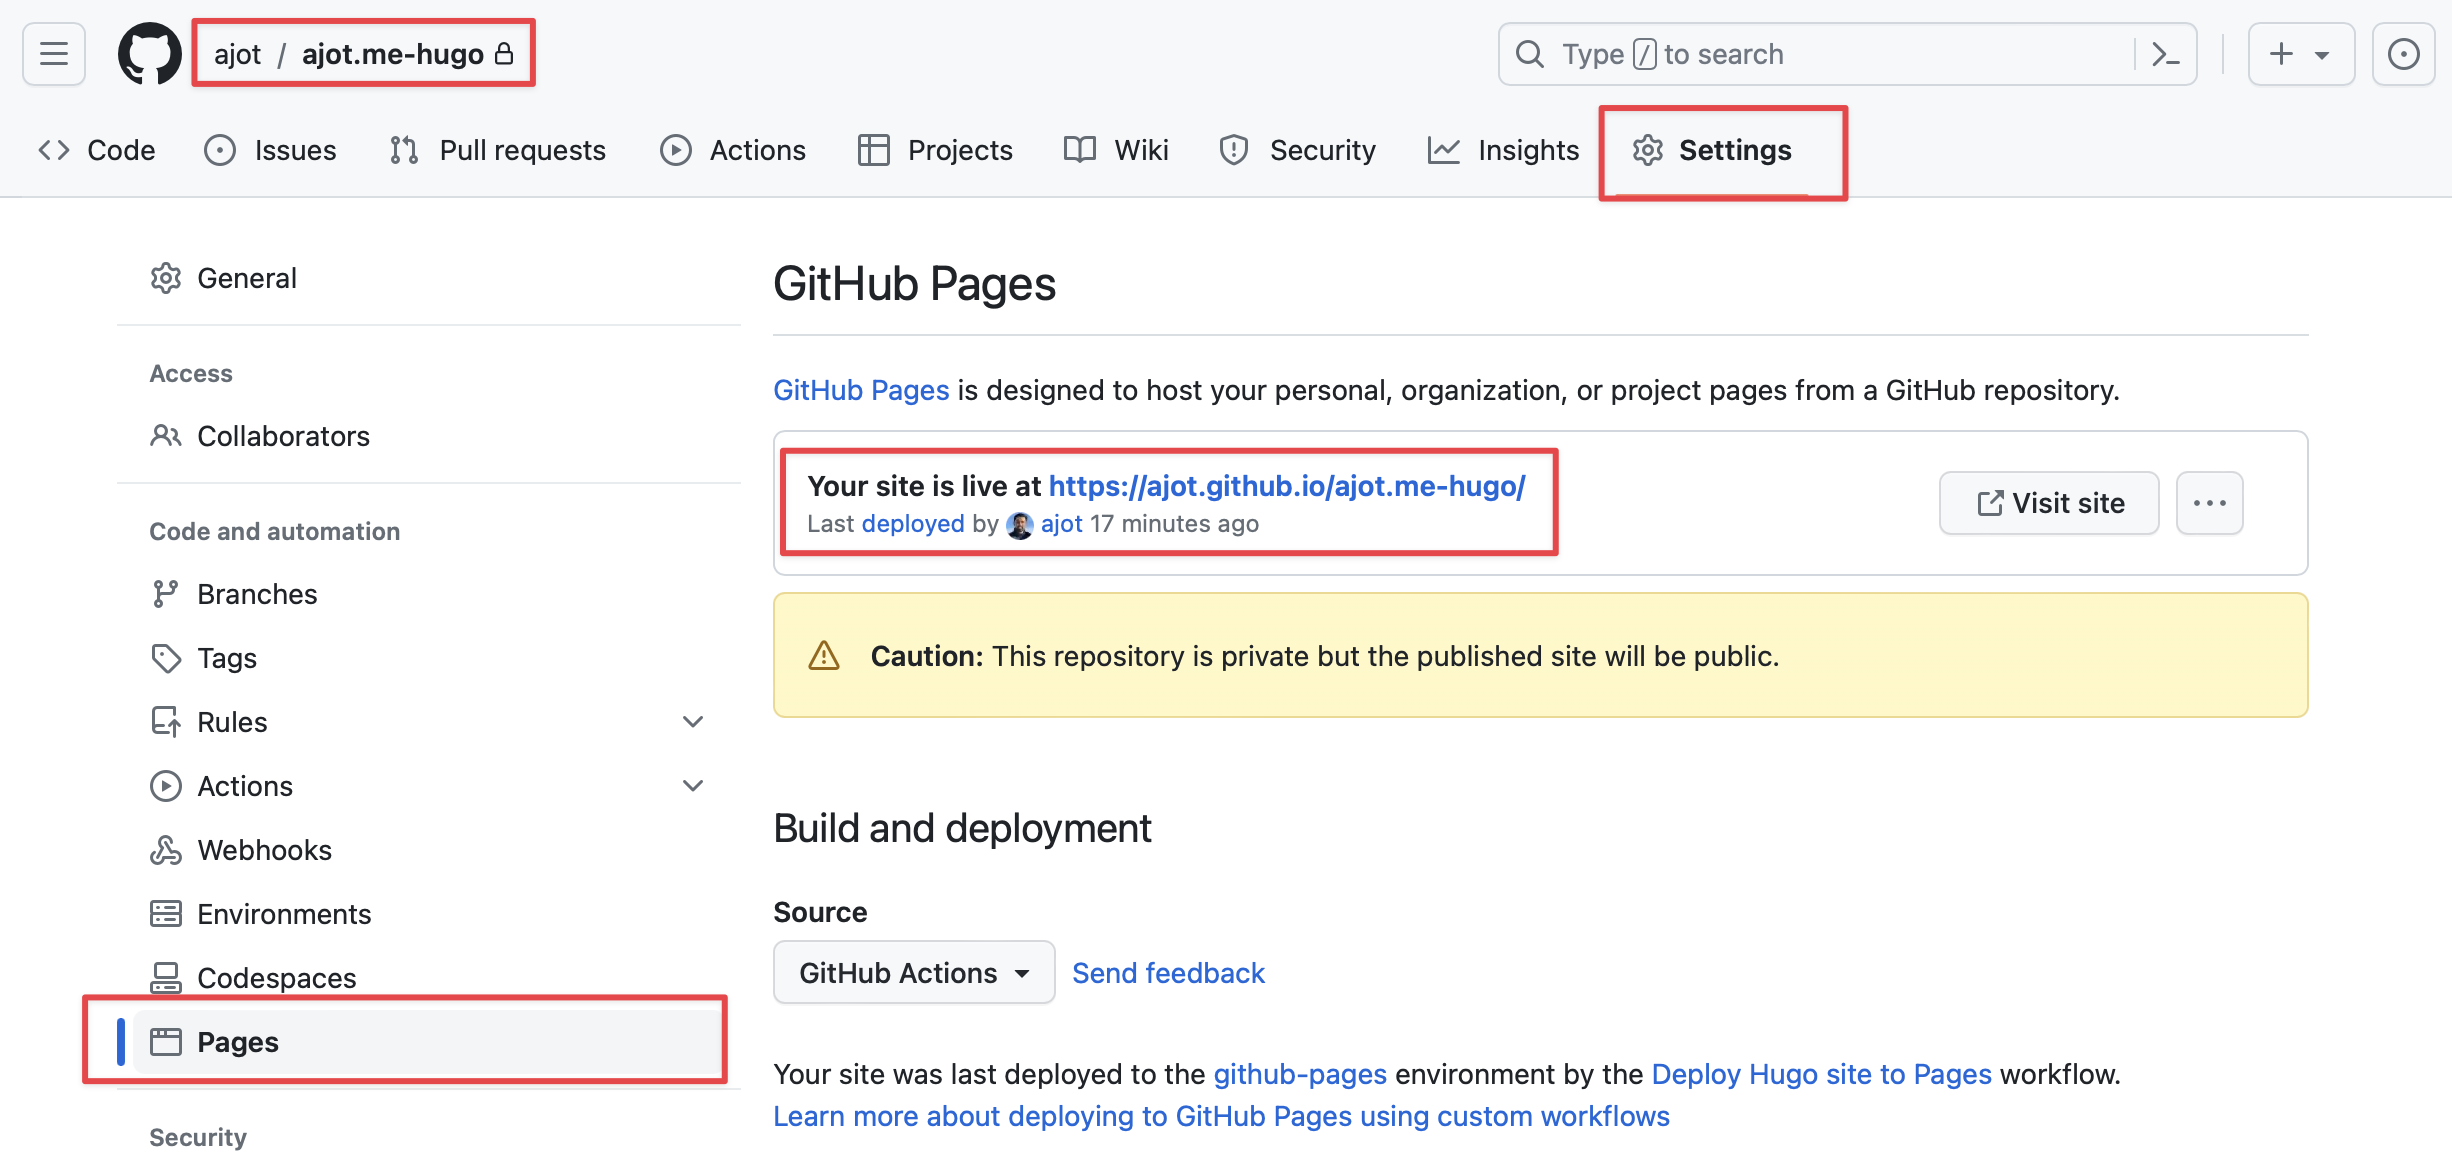 Deploying a Hugo Website to GitHub Pages Using GitHub Actions